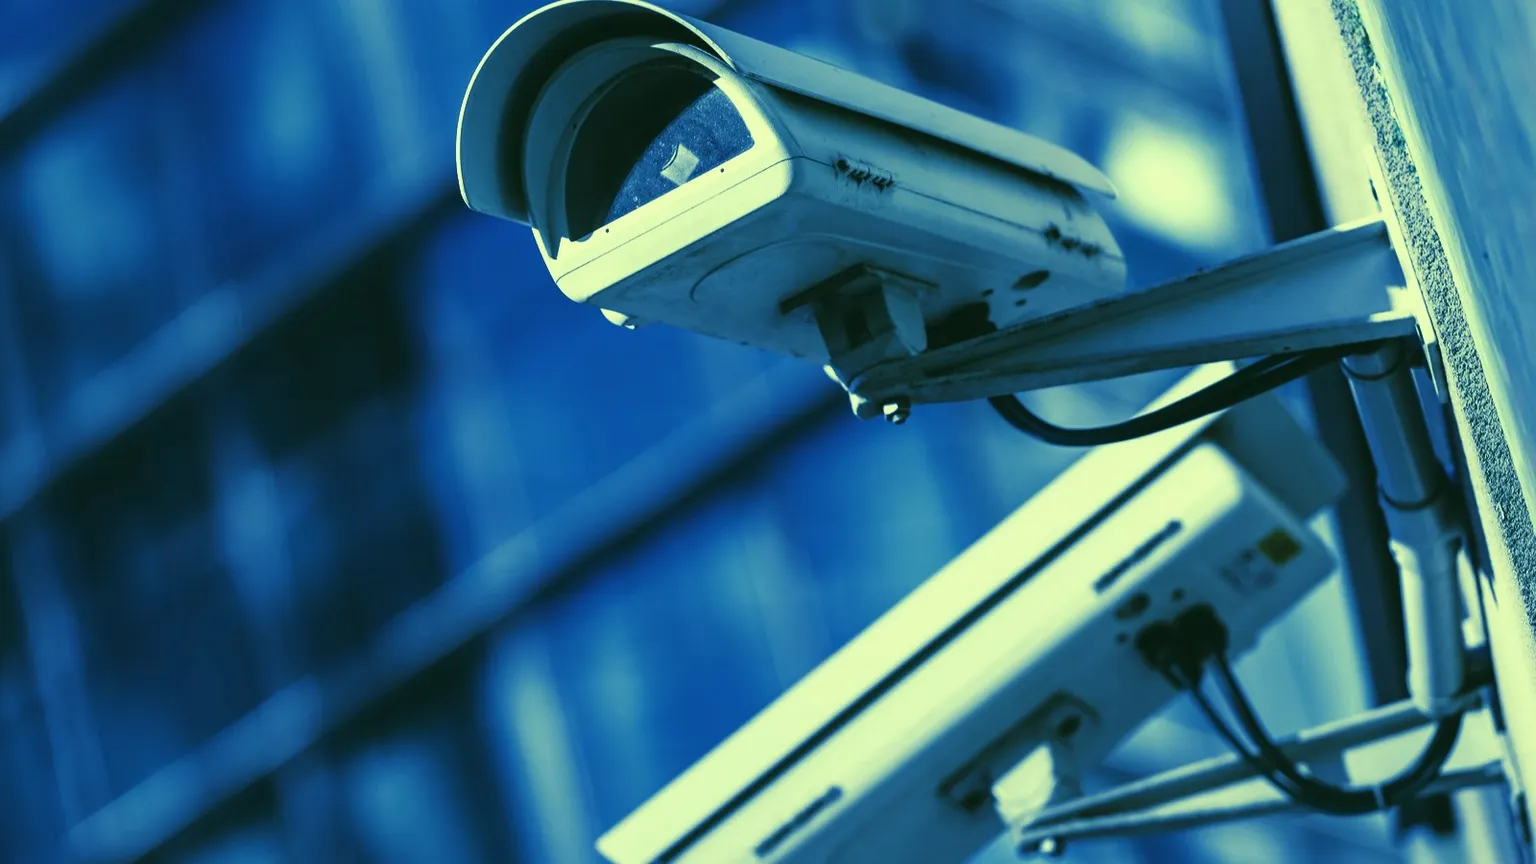 Ripple co-founder spends $4 million on a surveillance system for San Francisco. Image: Shutterstock